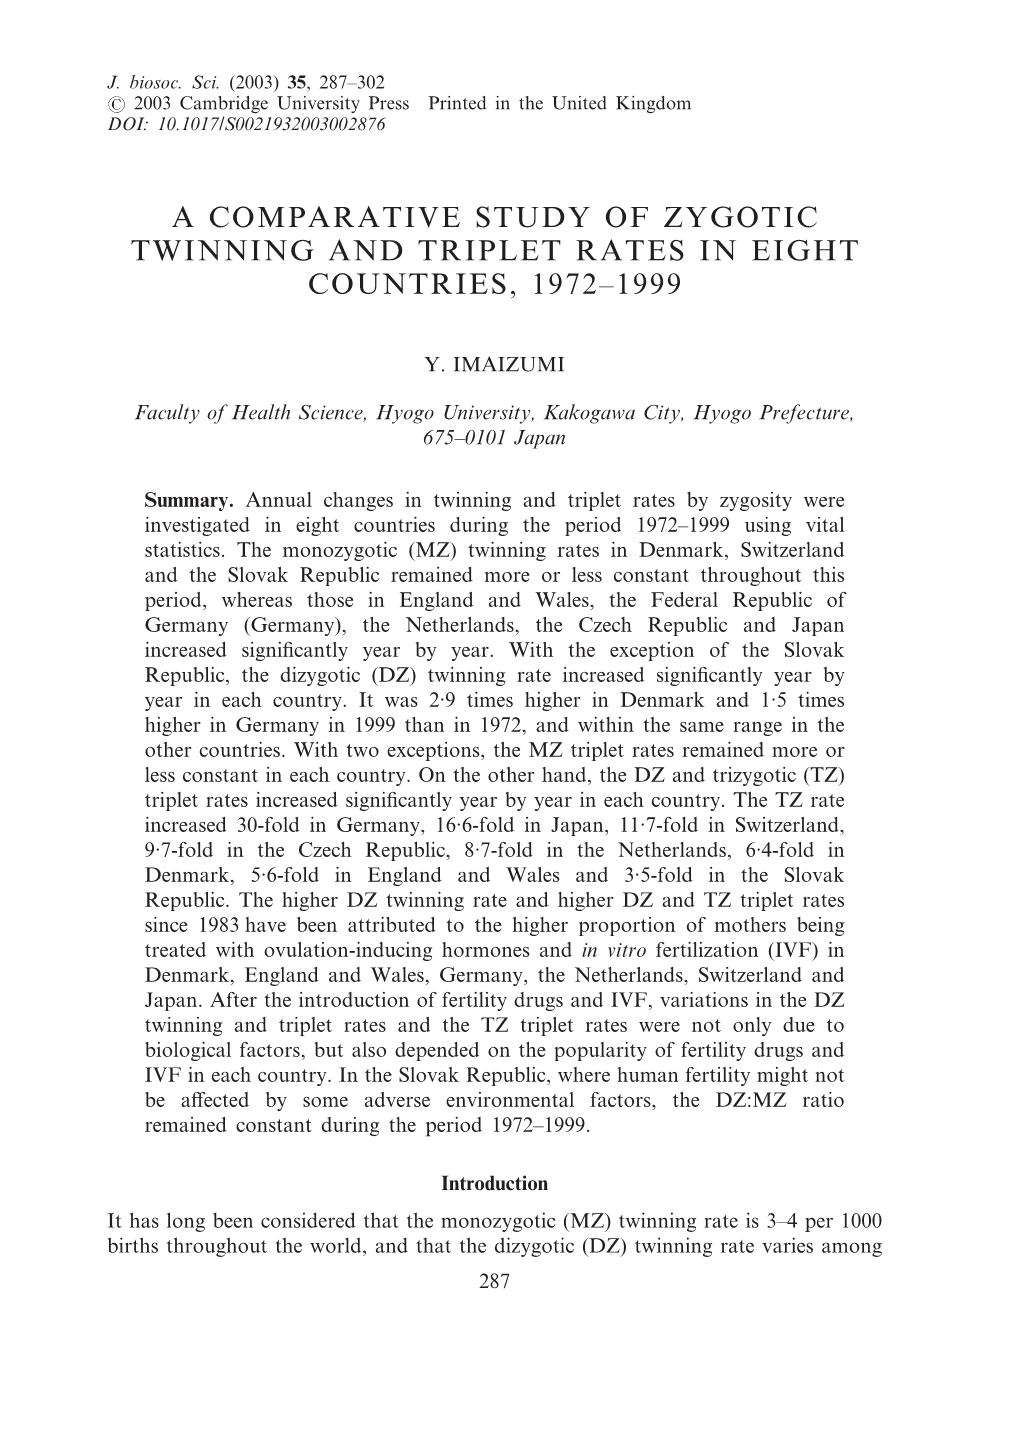 A Comparative Study of Zygotic Twinning and Triplet Rates in Eight Countries, 1972–1999